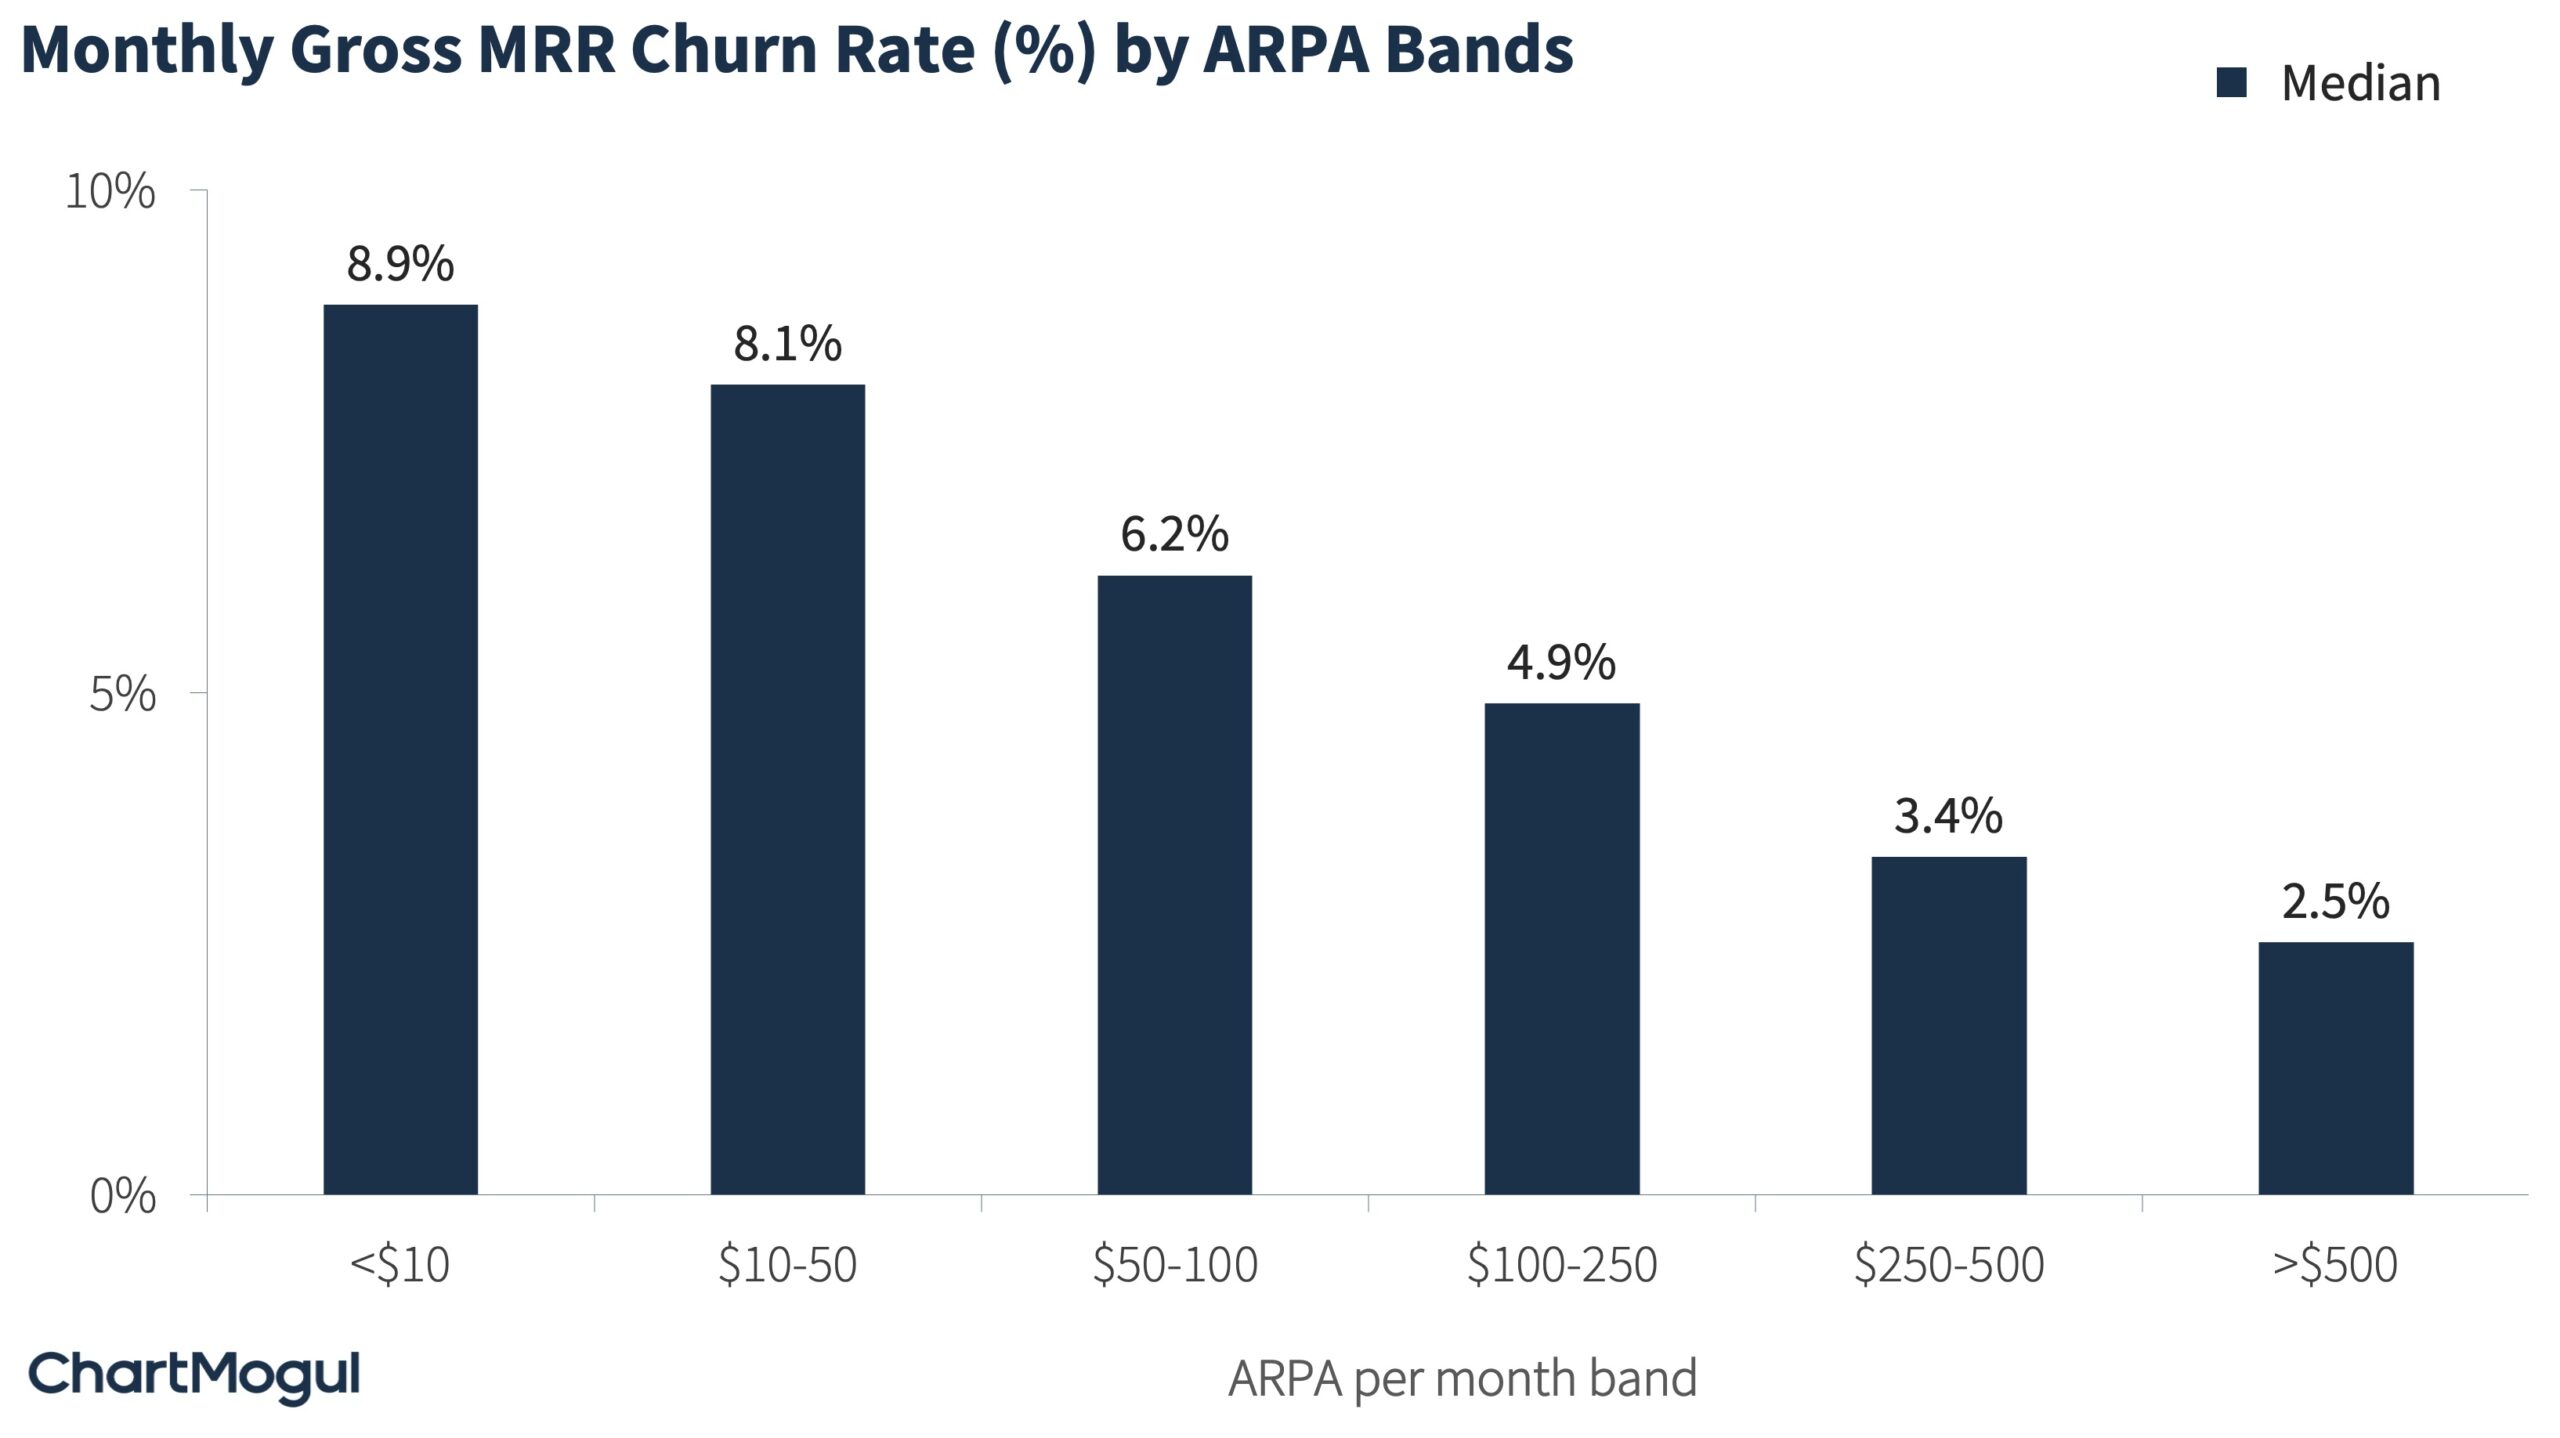 Monthly Gross MRR Churn Rate by ARPA Bands